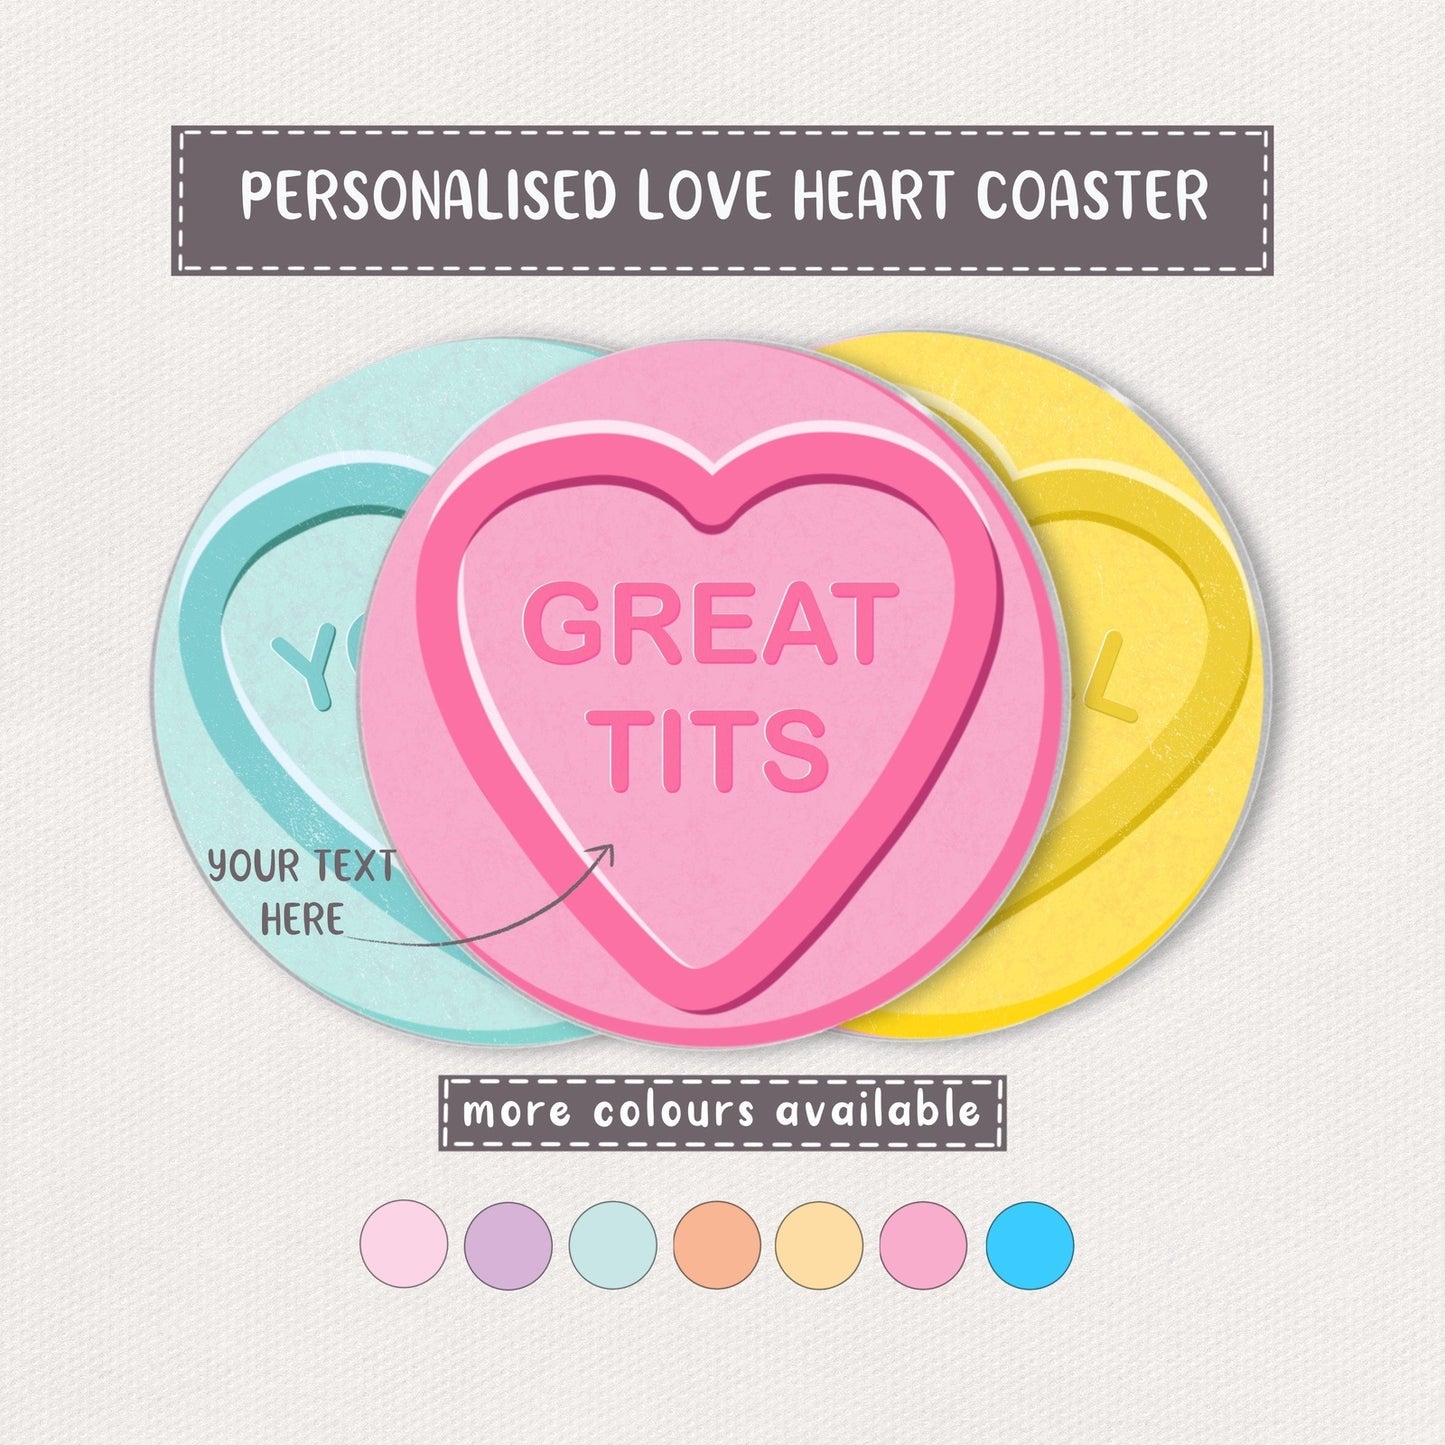 "Great Tits" Personalised Love Heart Coaster